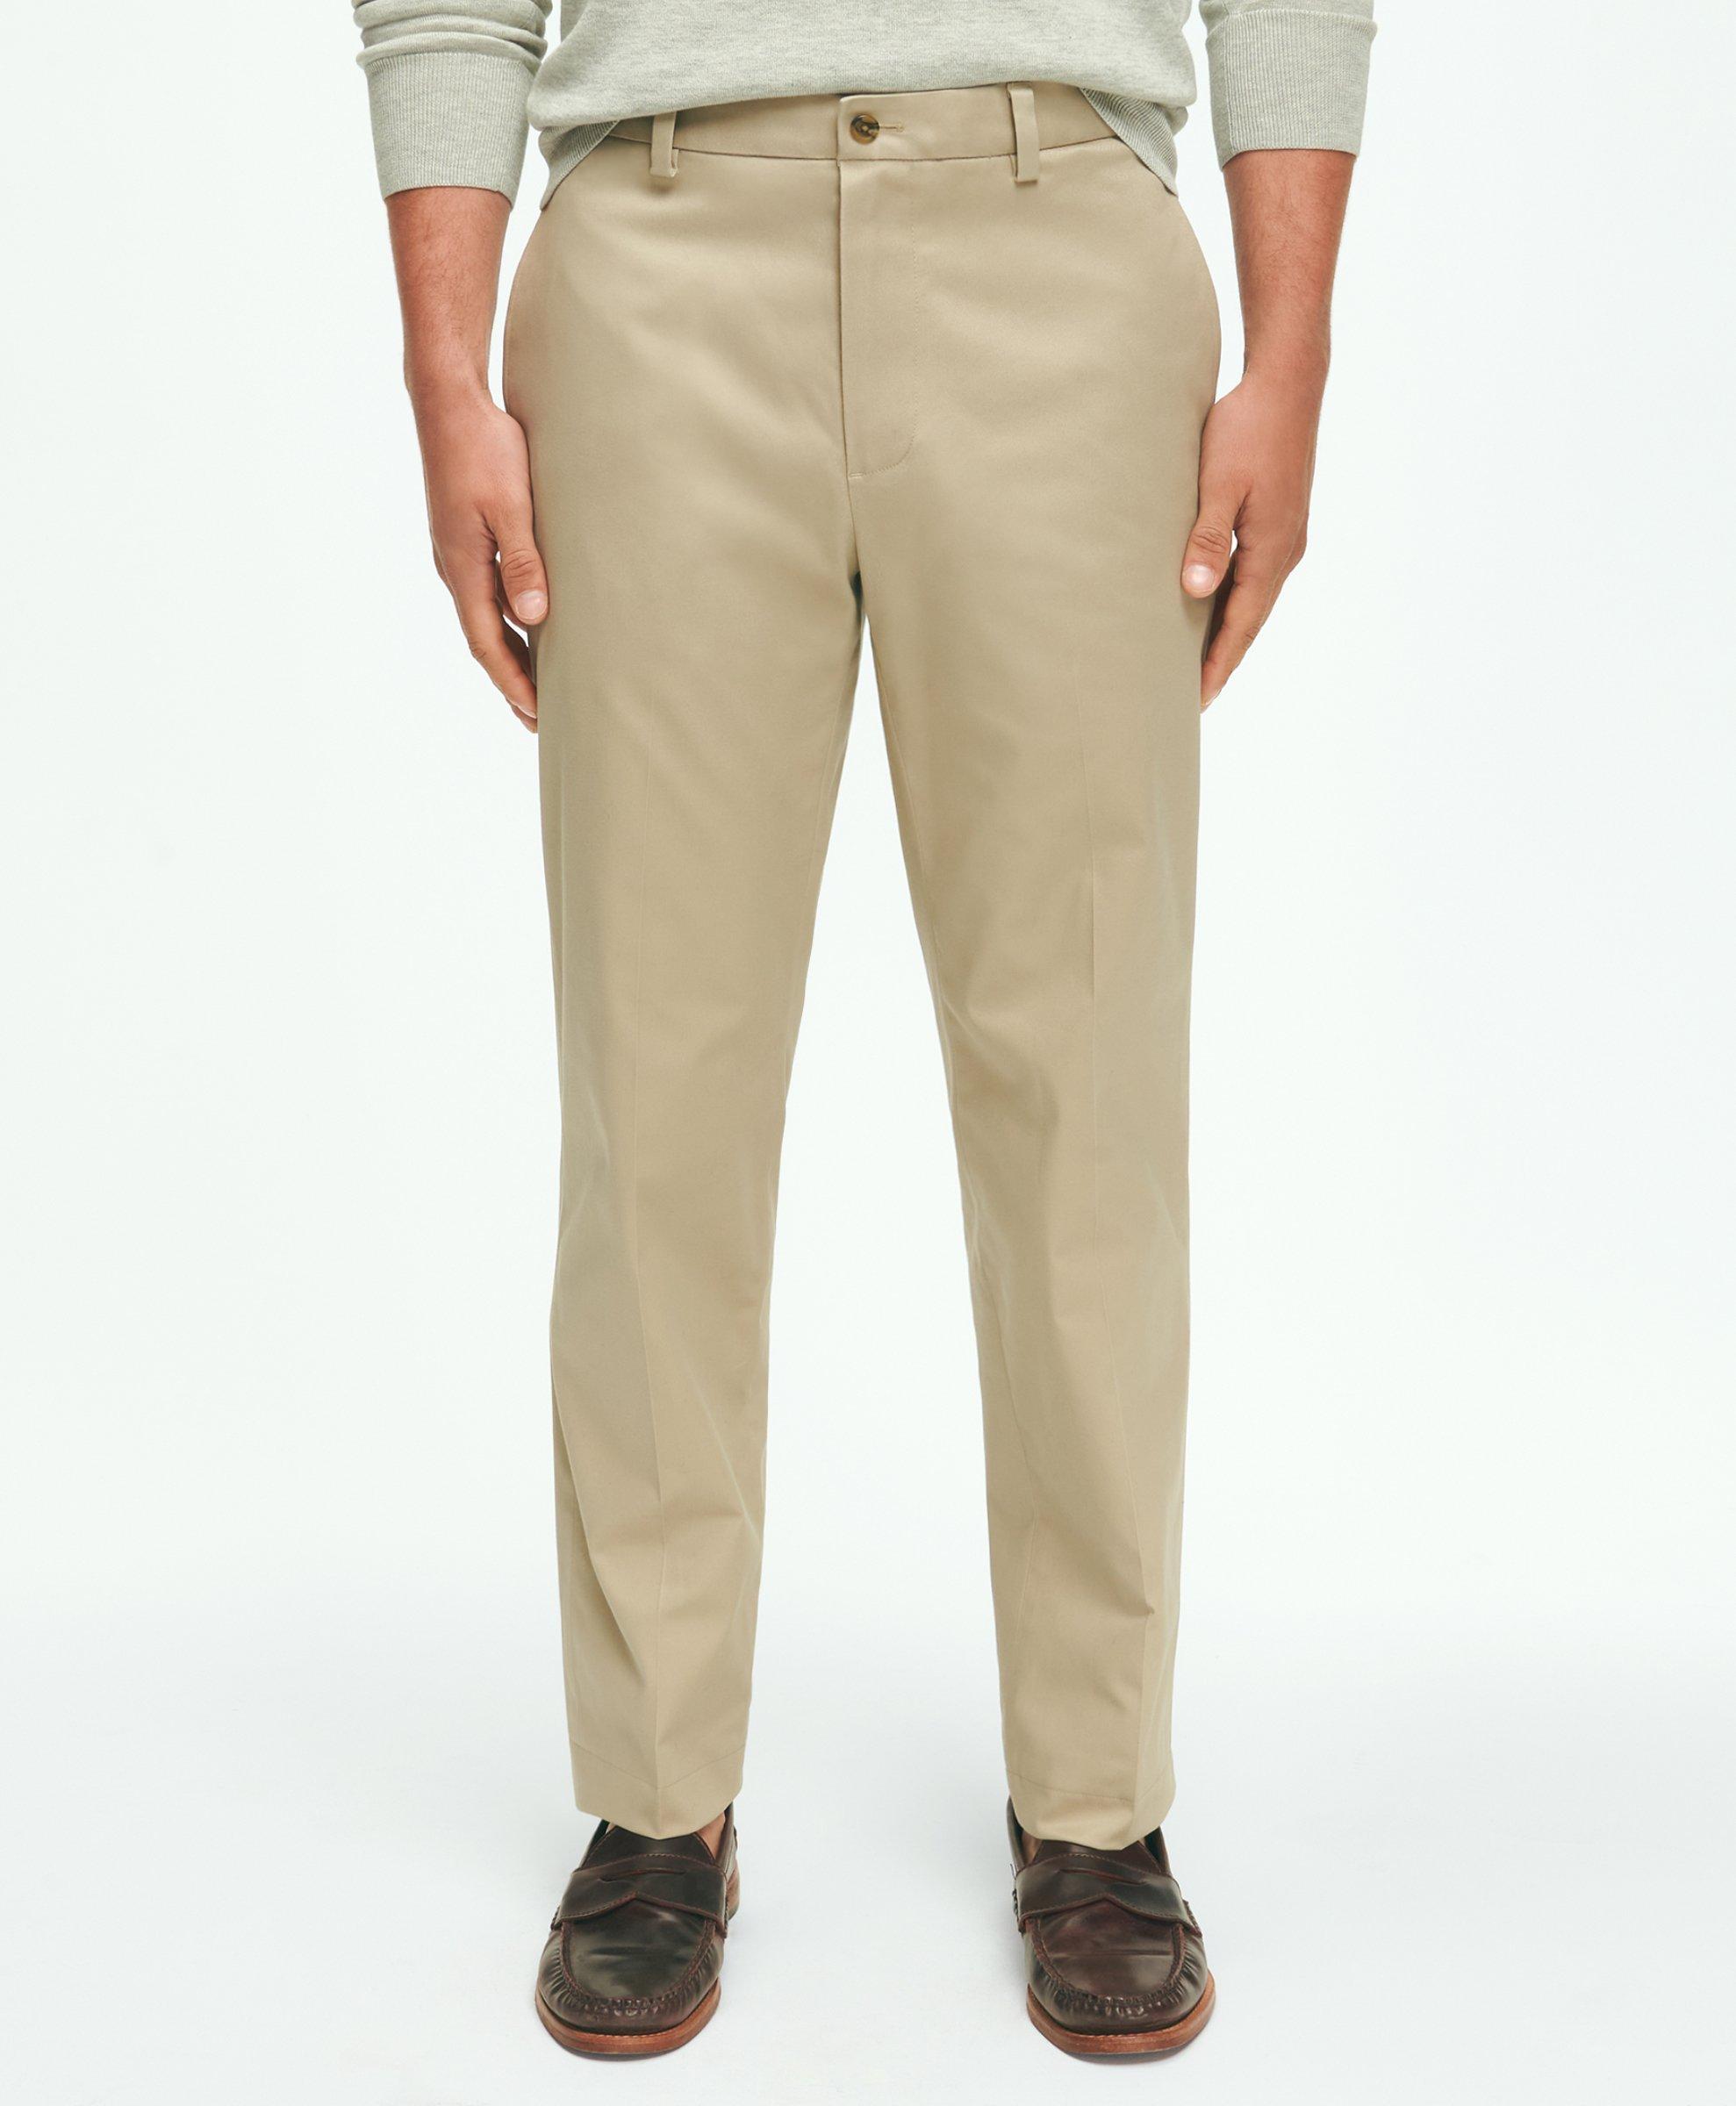 Casual Bottoms for Men - Buy Chinos, Trousers for Men Online at